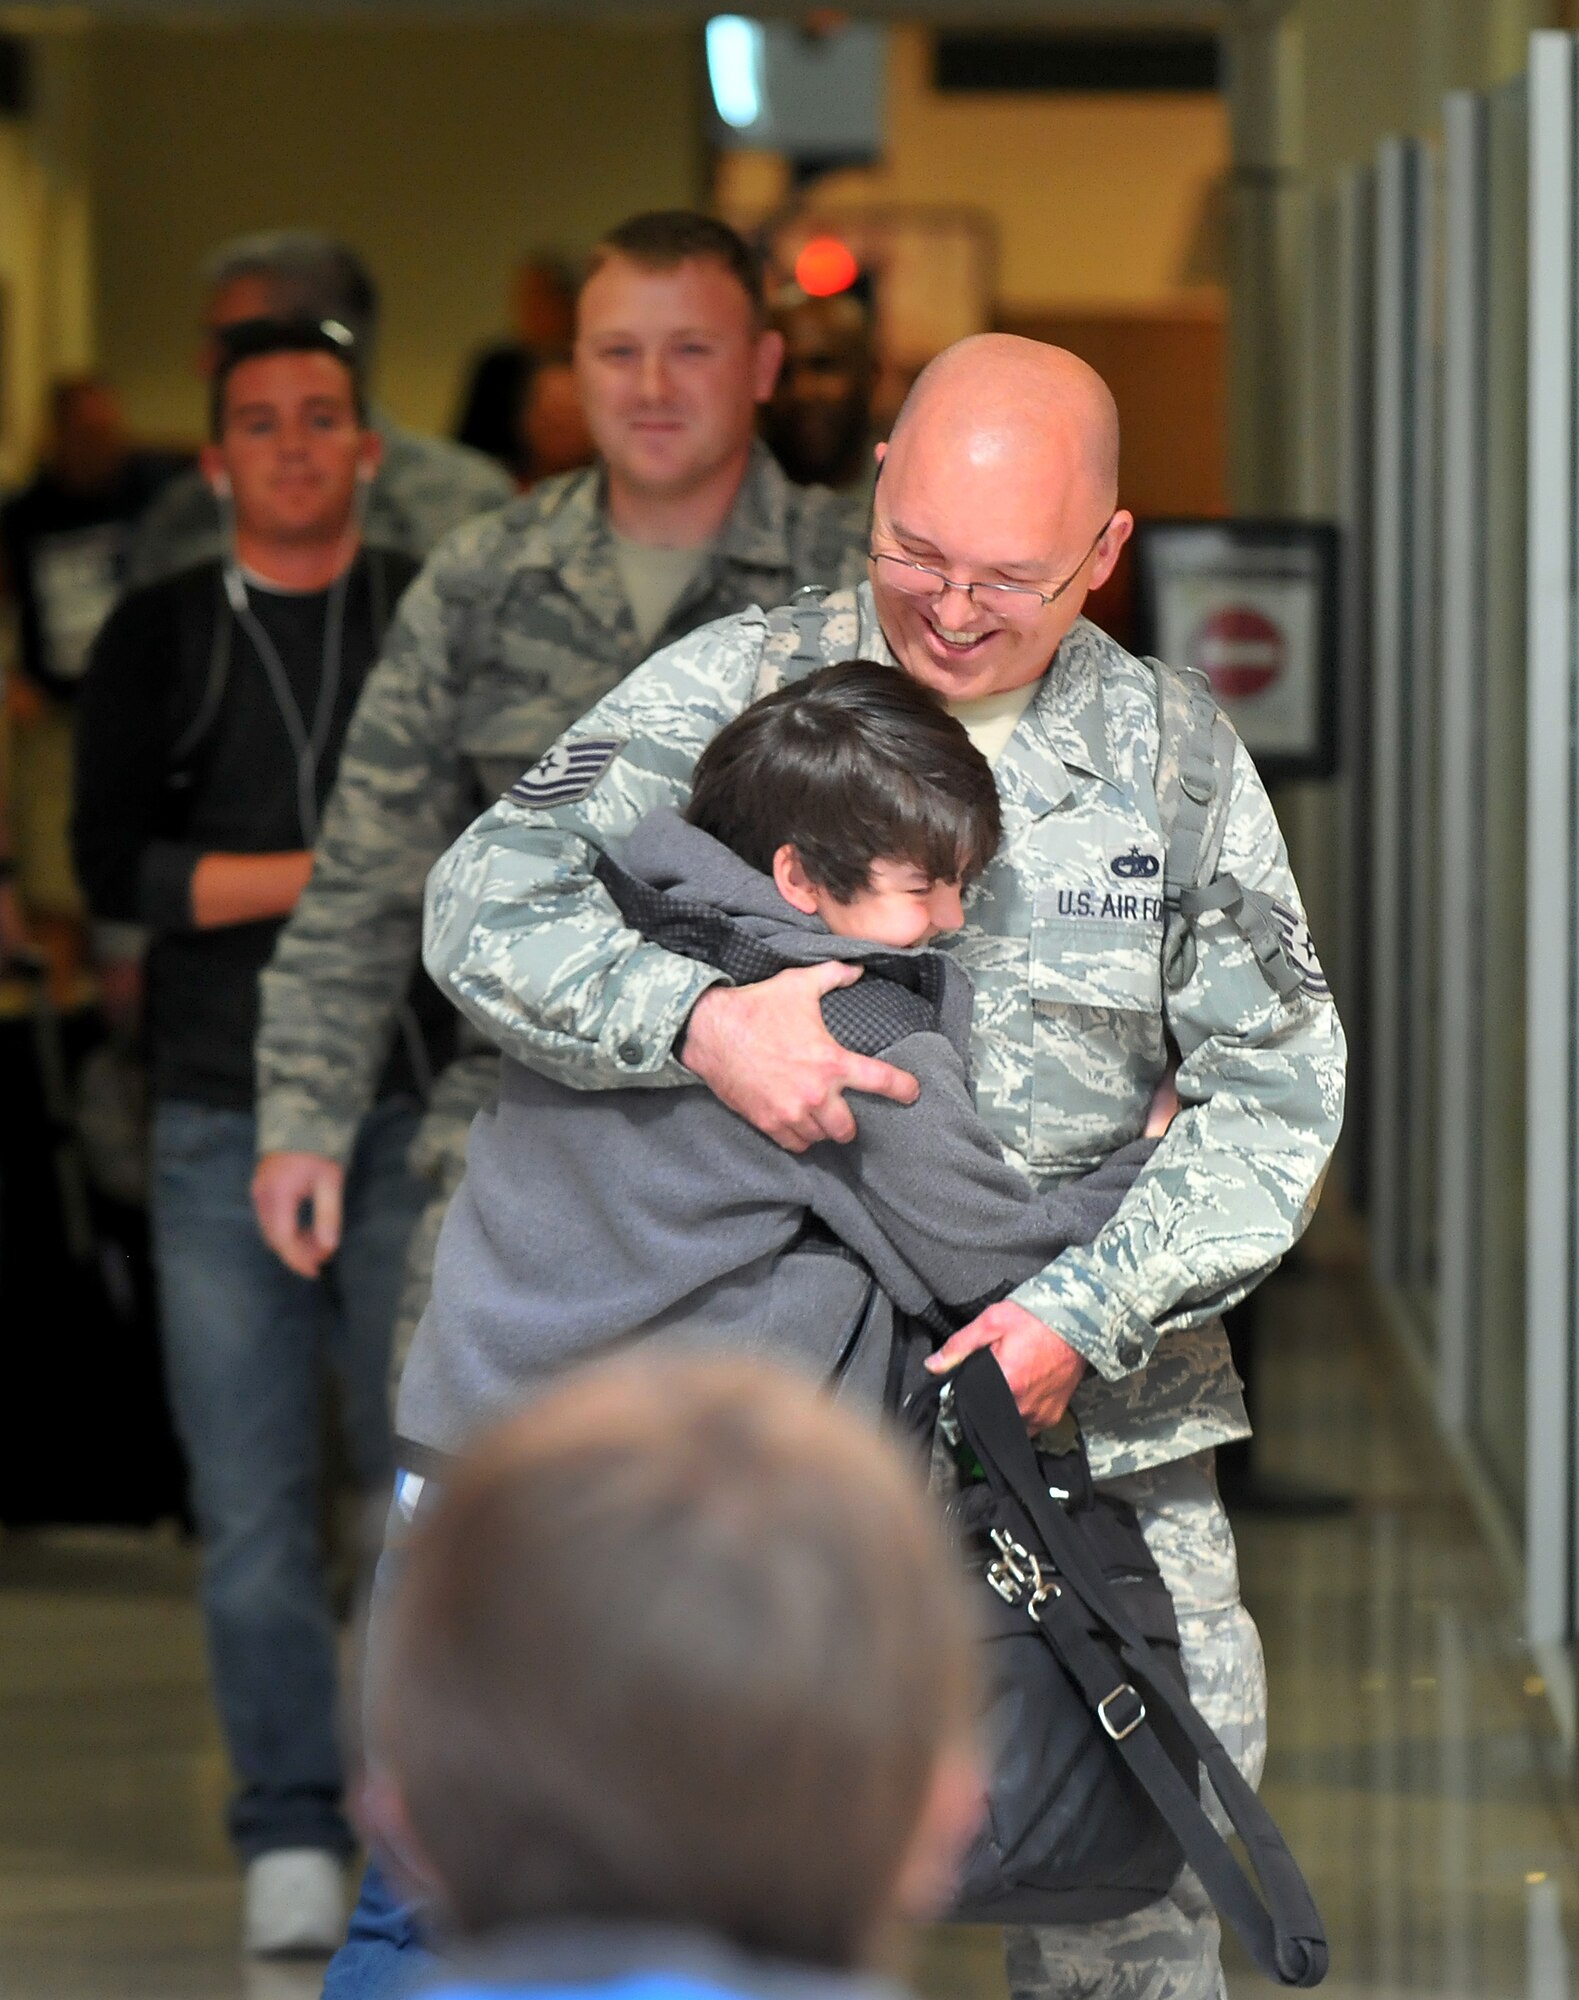 WRIGHT-PATTERSON AIR FORCE BASE, Oho – Tech. Sgt. David Kalb, 87th Aerial Port Squadron, is greeted by his son, Lucas, at the Dayton International Airport May 3 upon his return home from his deployment. Kalb and three 87 APS Airmen were returning home from their eight-month deployment to the Transit Center, Manas, Kyrgyzstan.  (U.S. Air Force photo/Tech. Sgt. Frank Oliver)